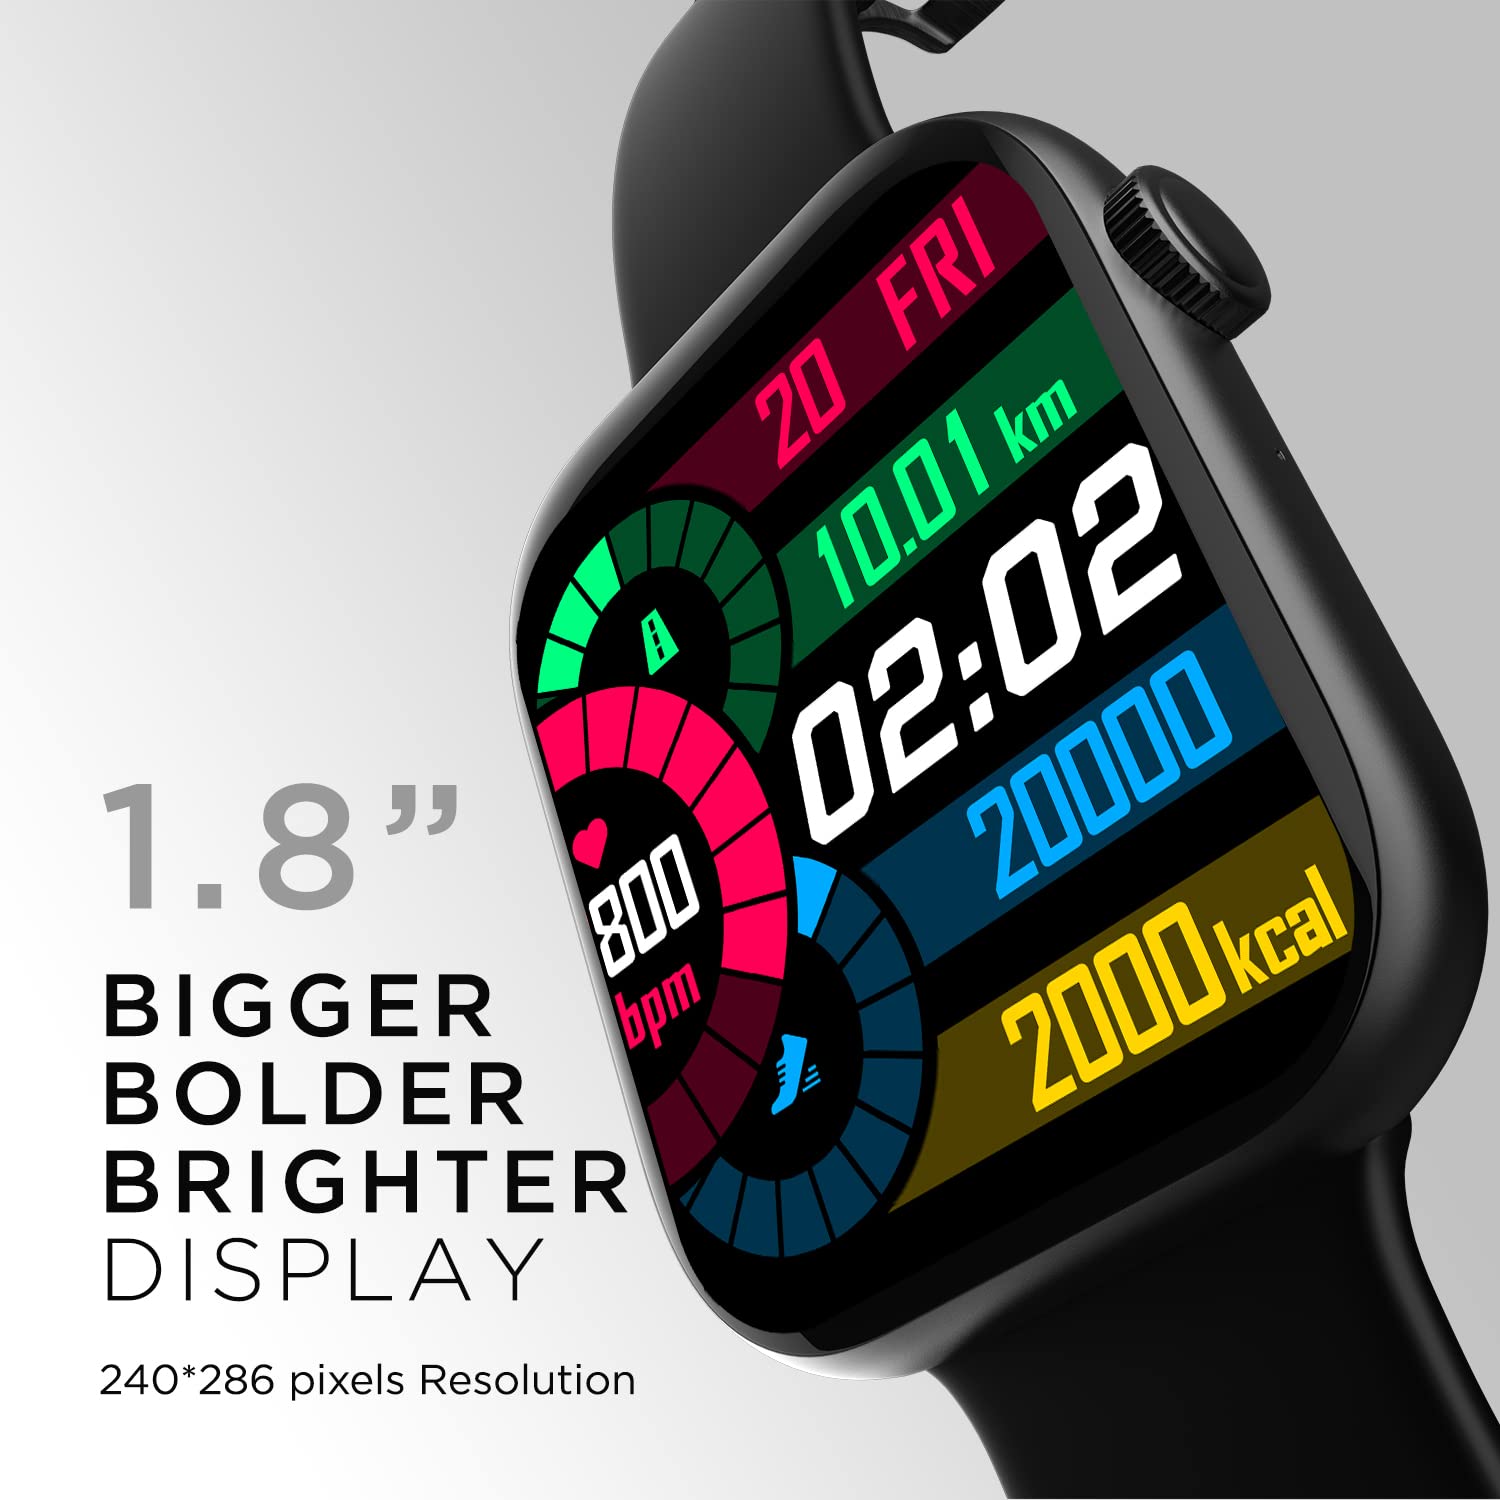 Newly Launched Fire-Boltt Ring 3 Bluetooth Calling 1.8" Largest Display Smartwatch, 118 Sports Modes, Voice Assistance, SpO2, Heart Rate Monitoring, Built-in Calculator & Games